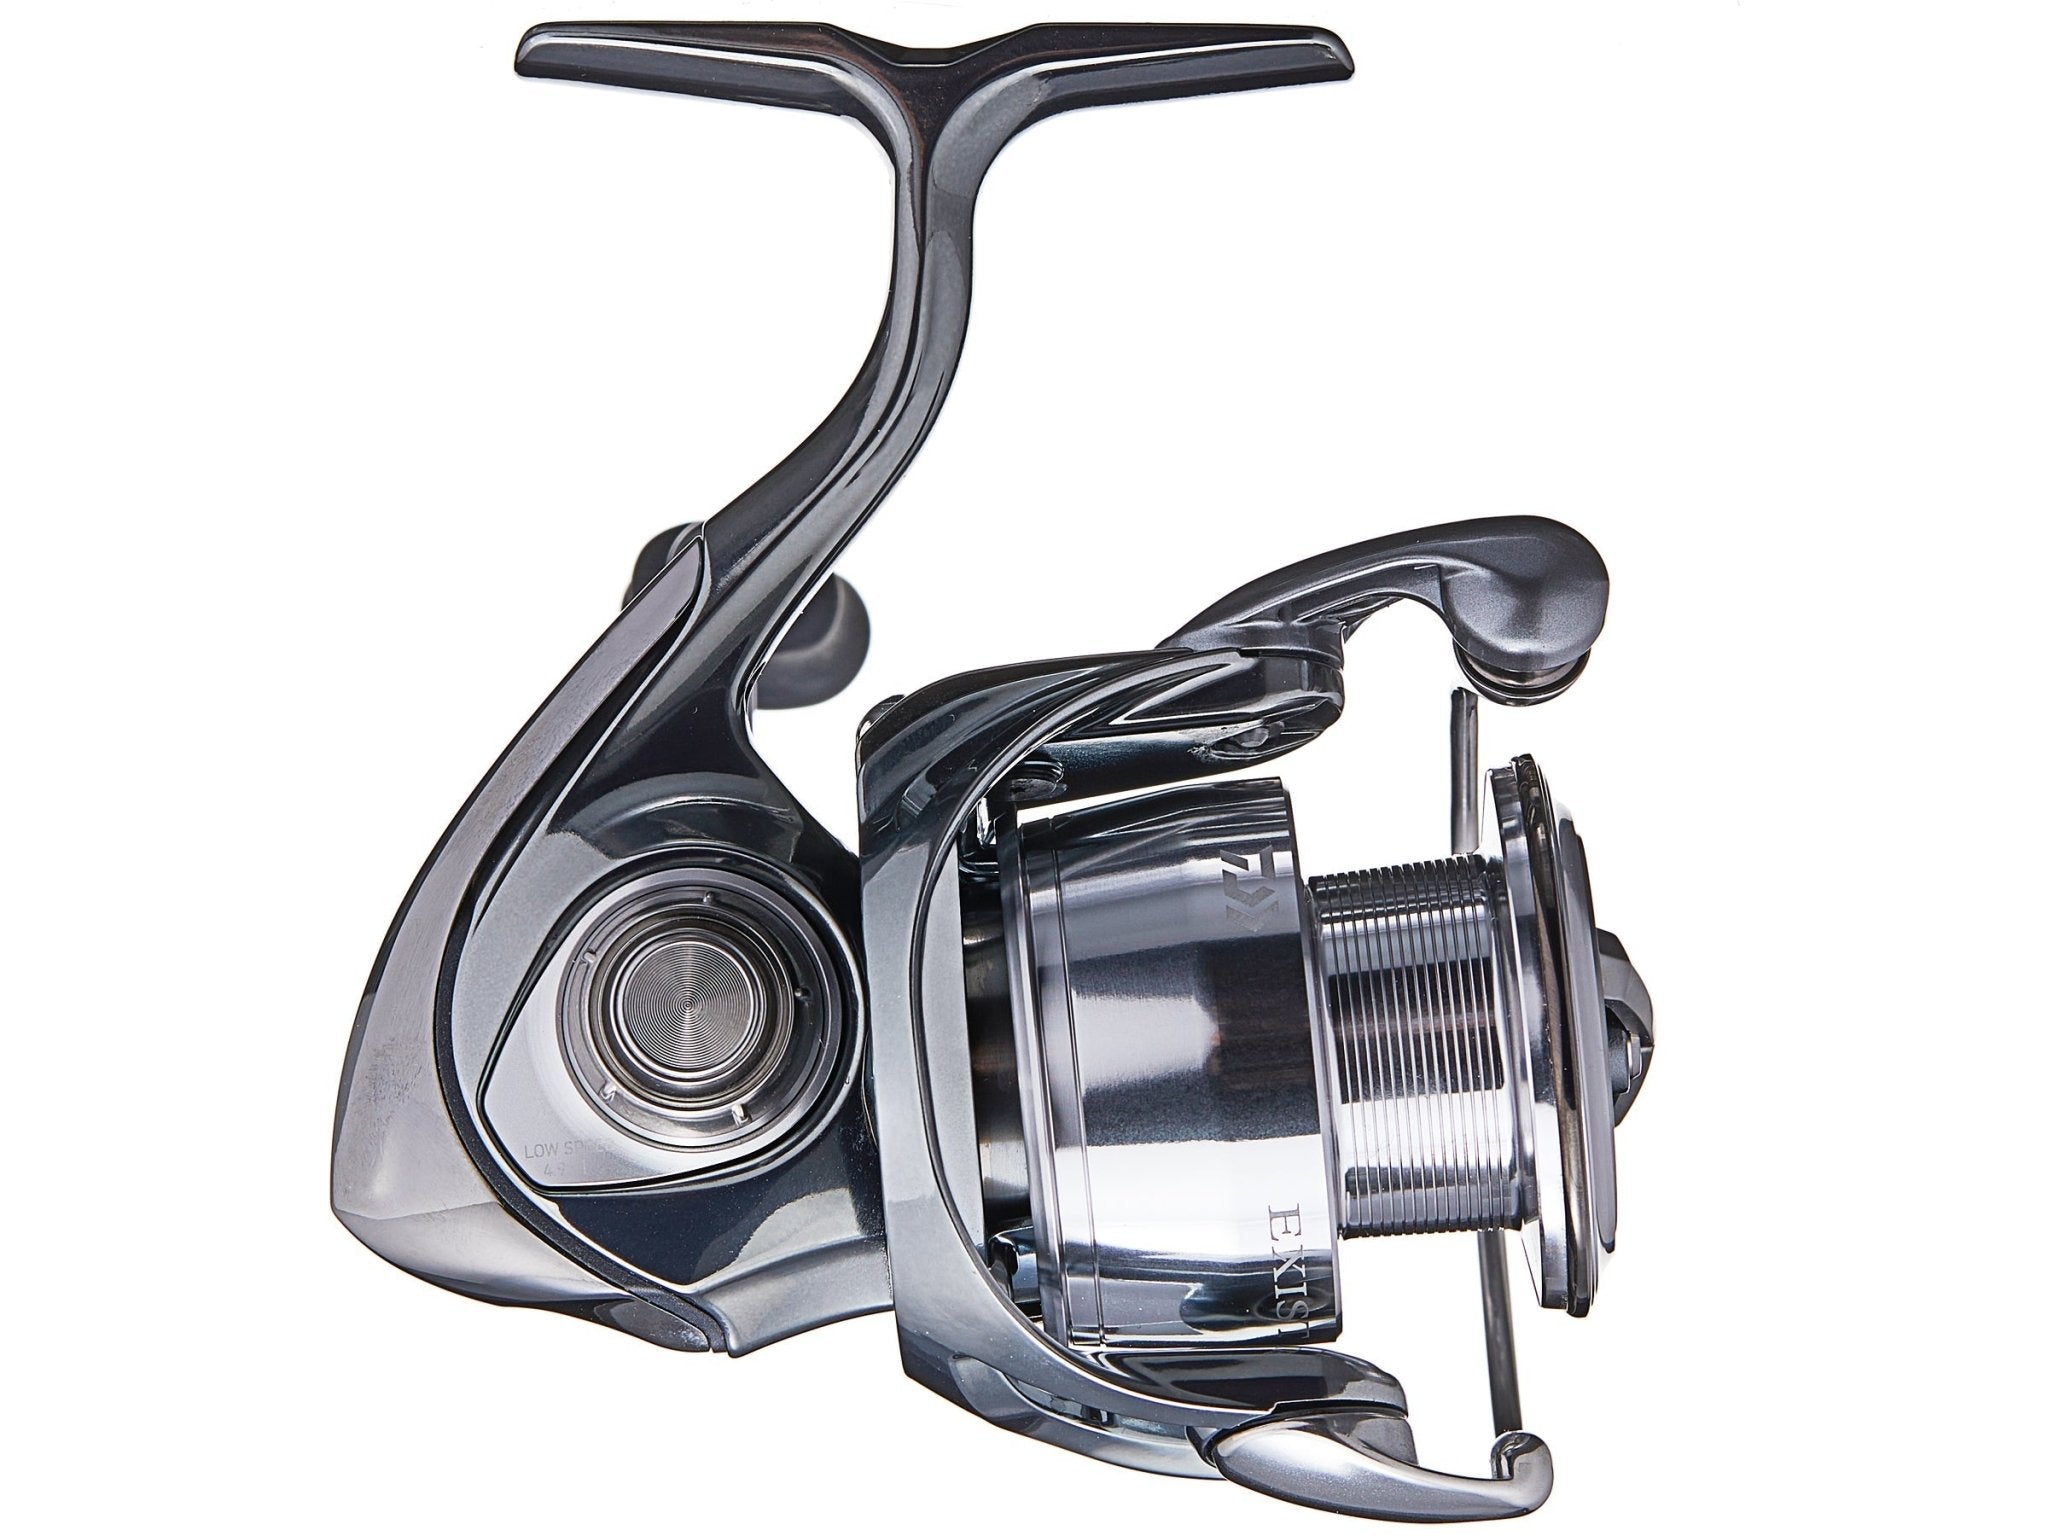 Daiwa Exist G LT Spinning Reel - Hamilton Bait and Tackle